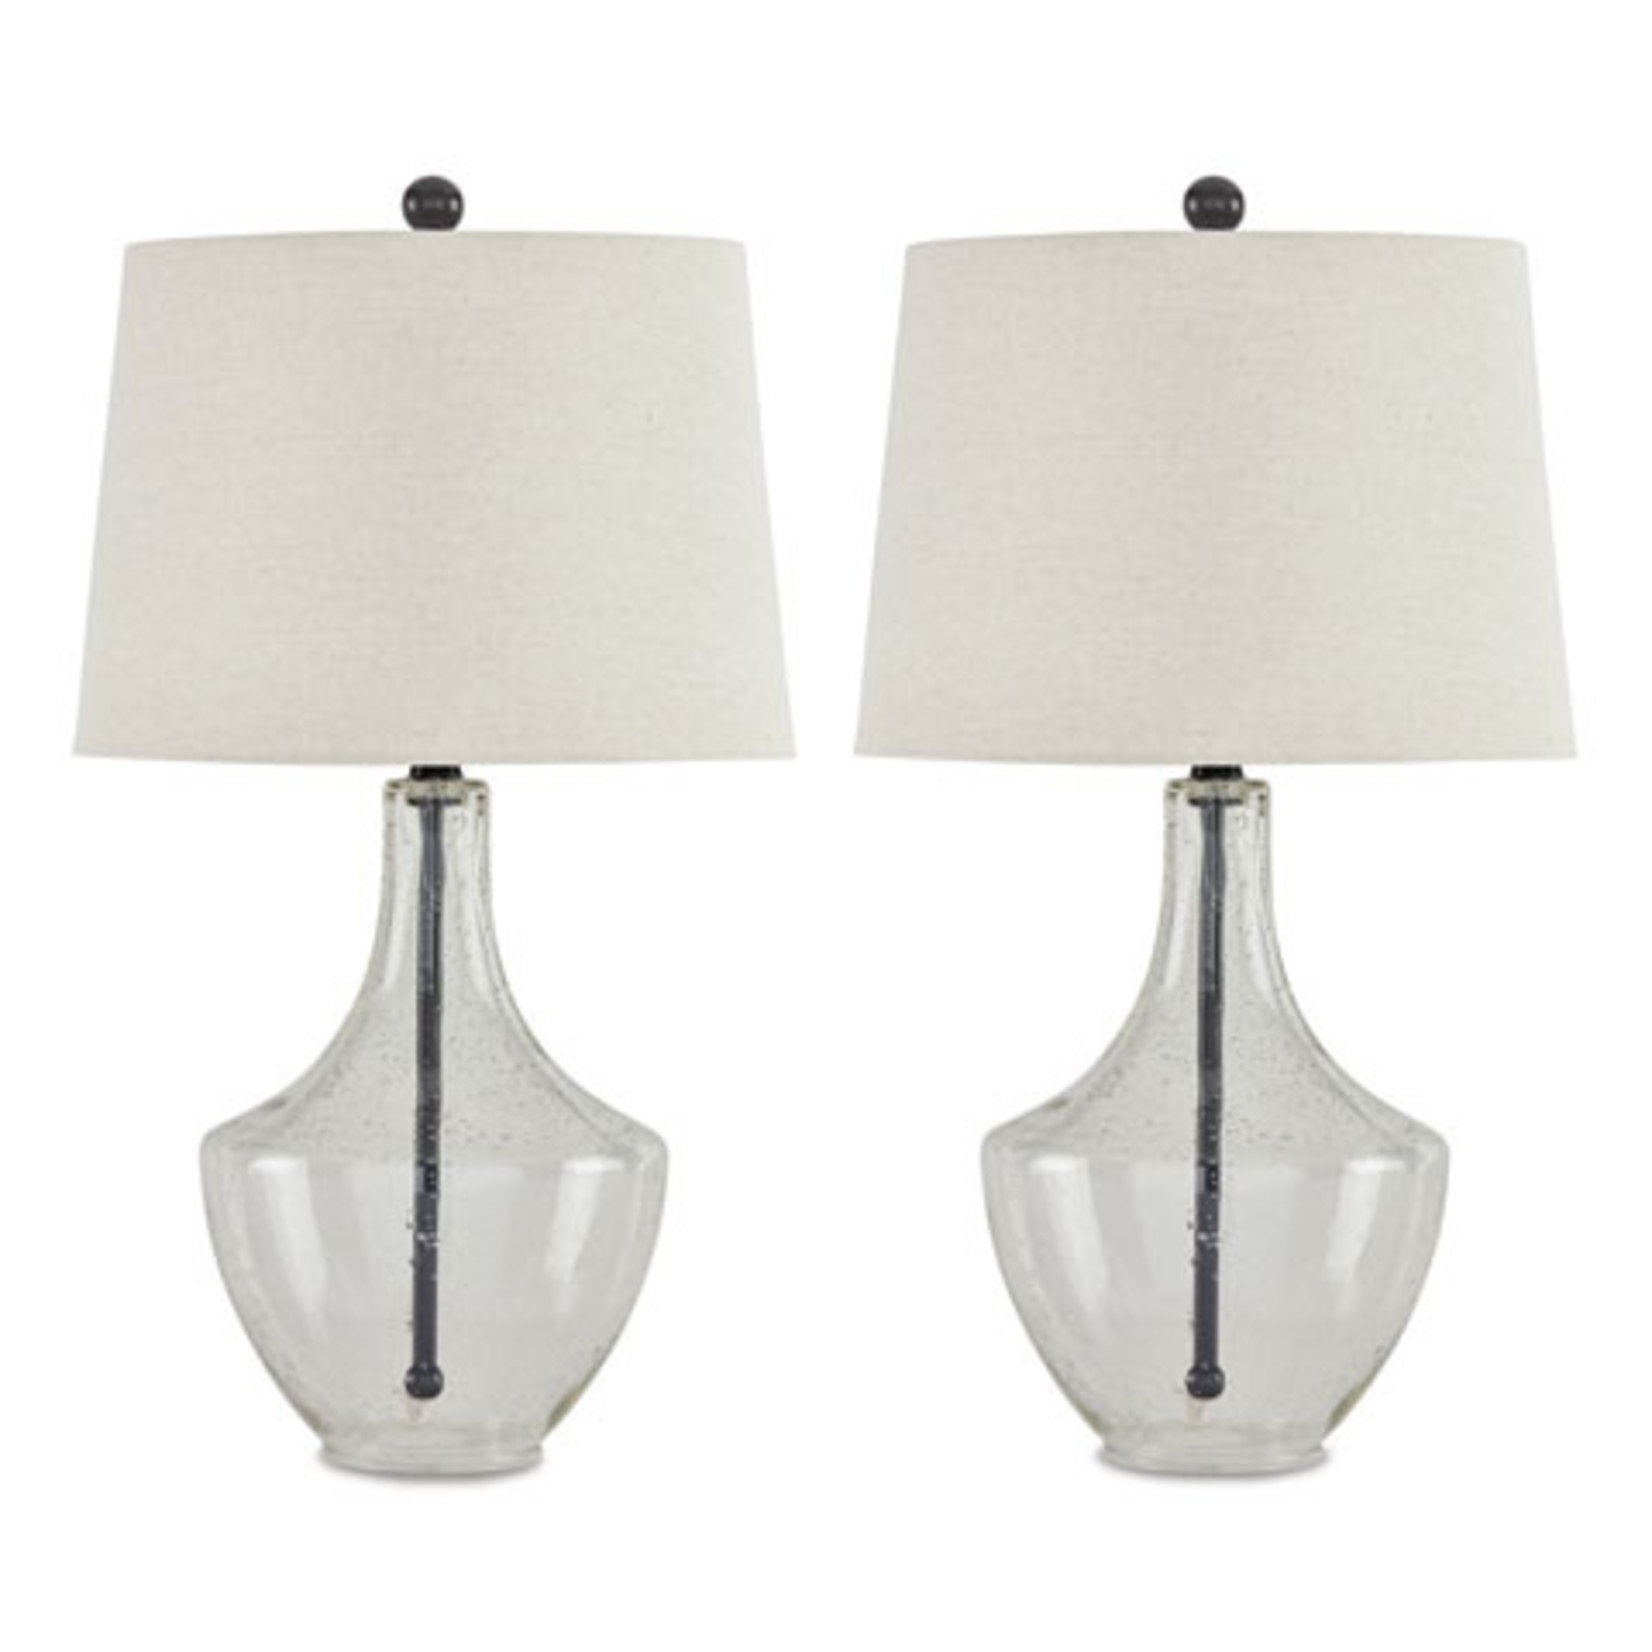 ASHLEY FURNITURE GREGSBY GLASS TABLE LAMP SET OF 2 BY ASHLEY